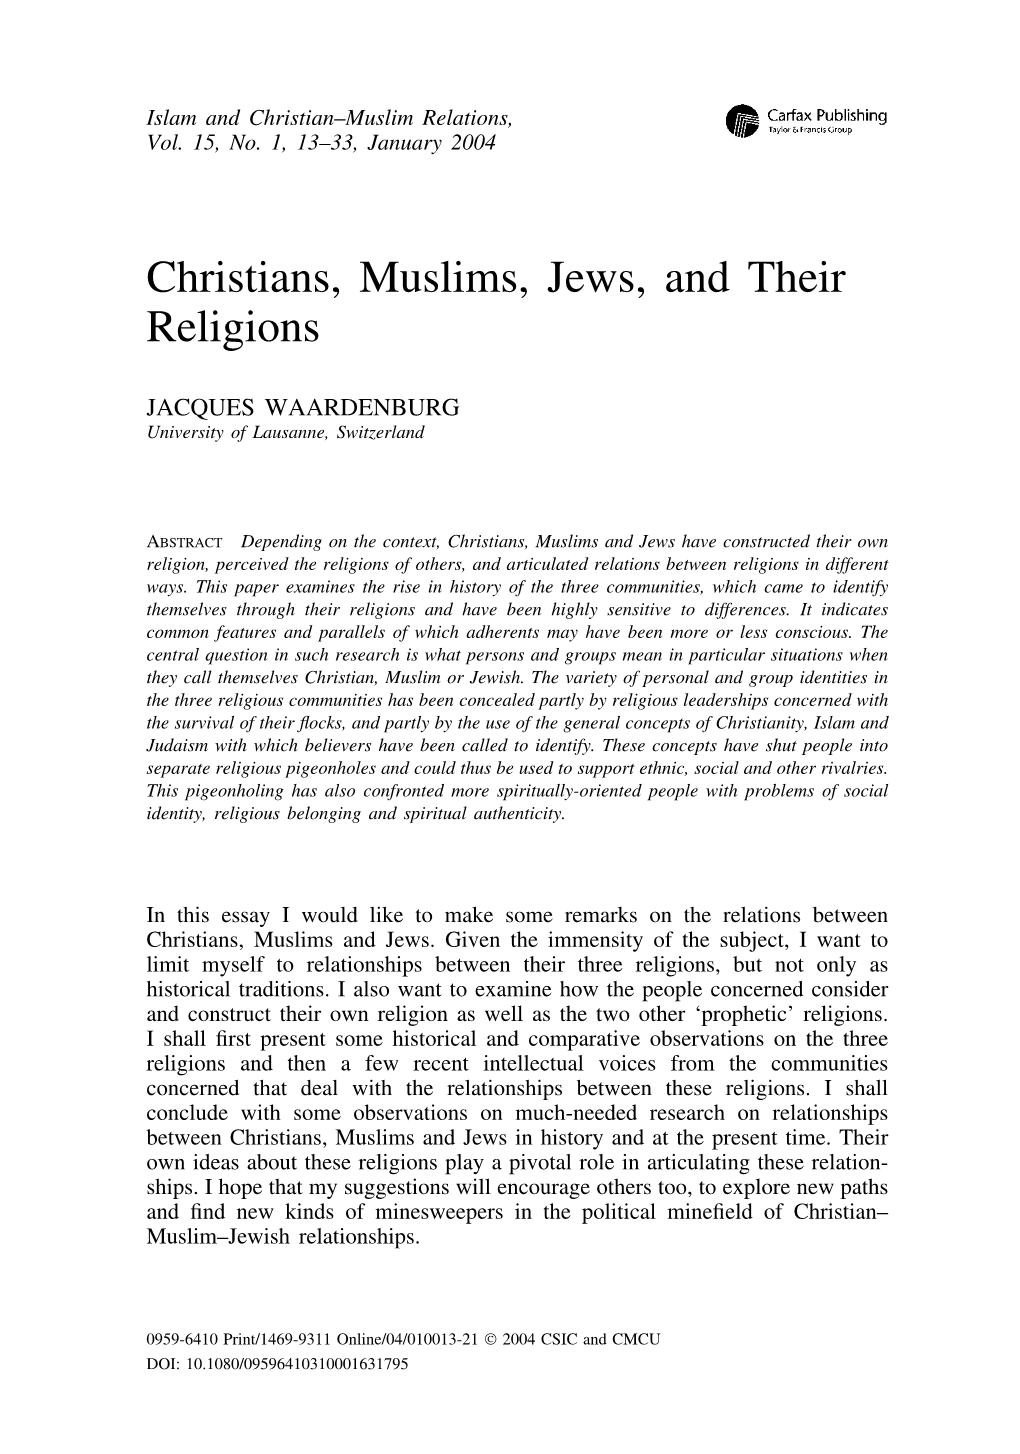 Christians, Muslims, Jews, and Their Religions